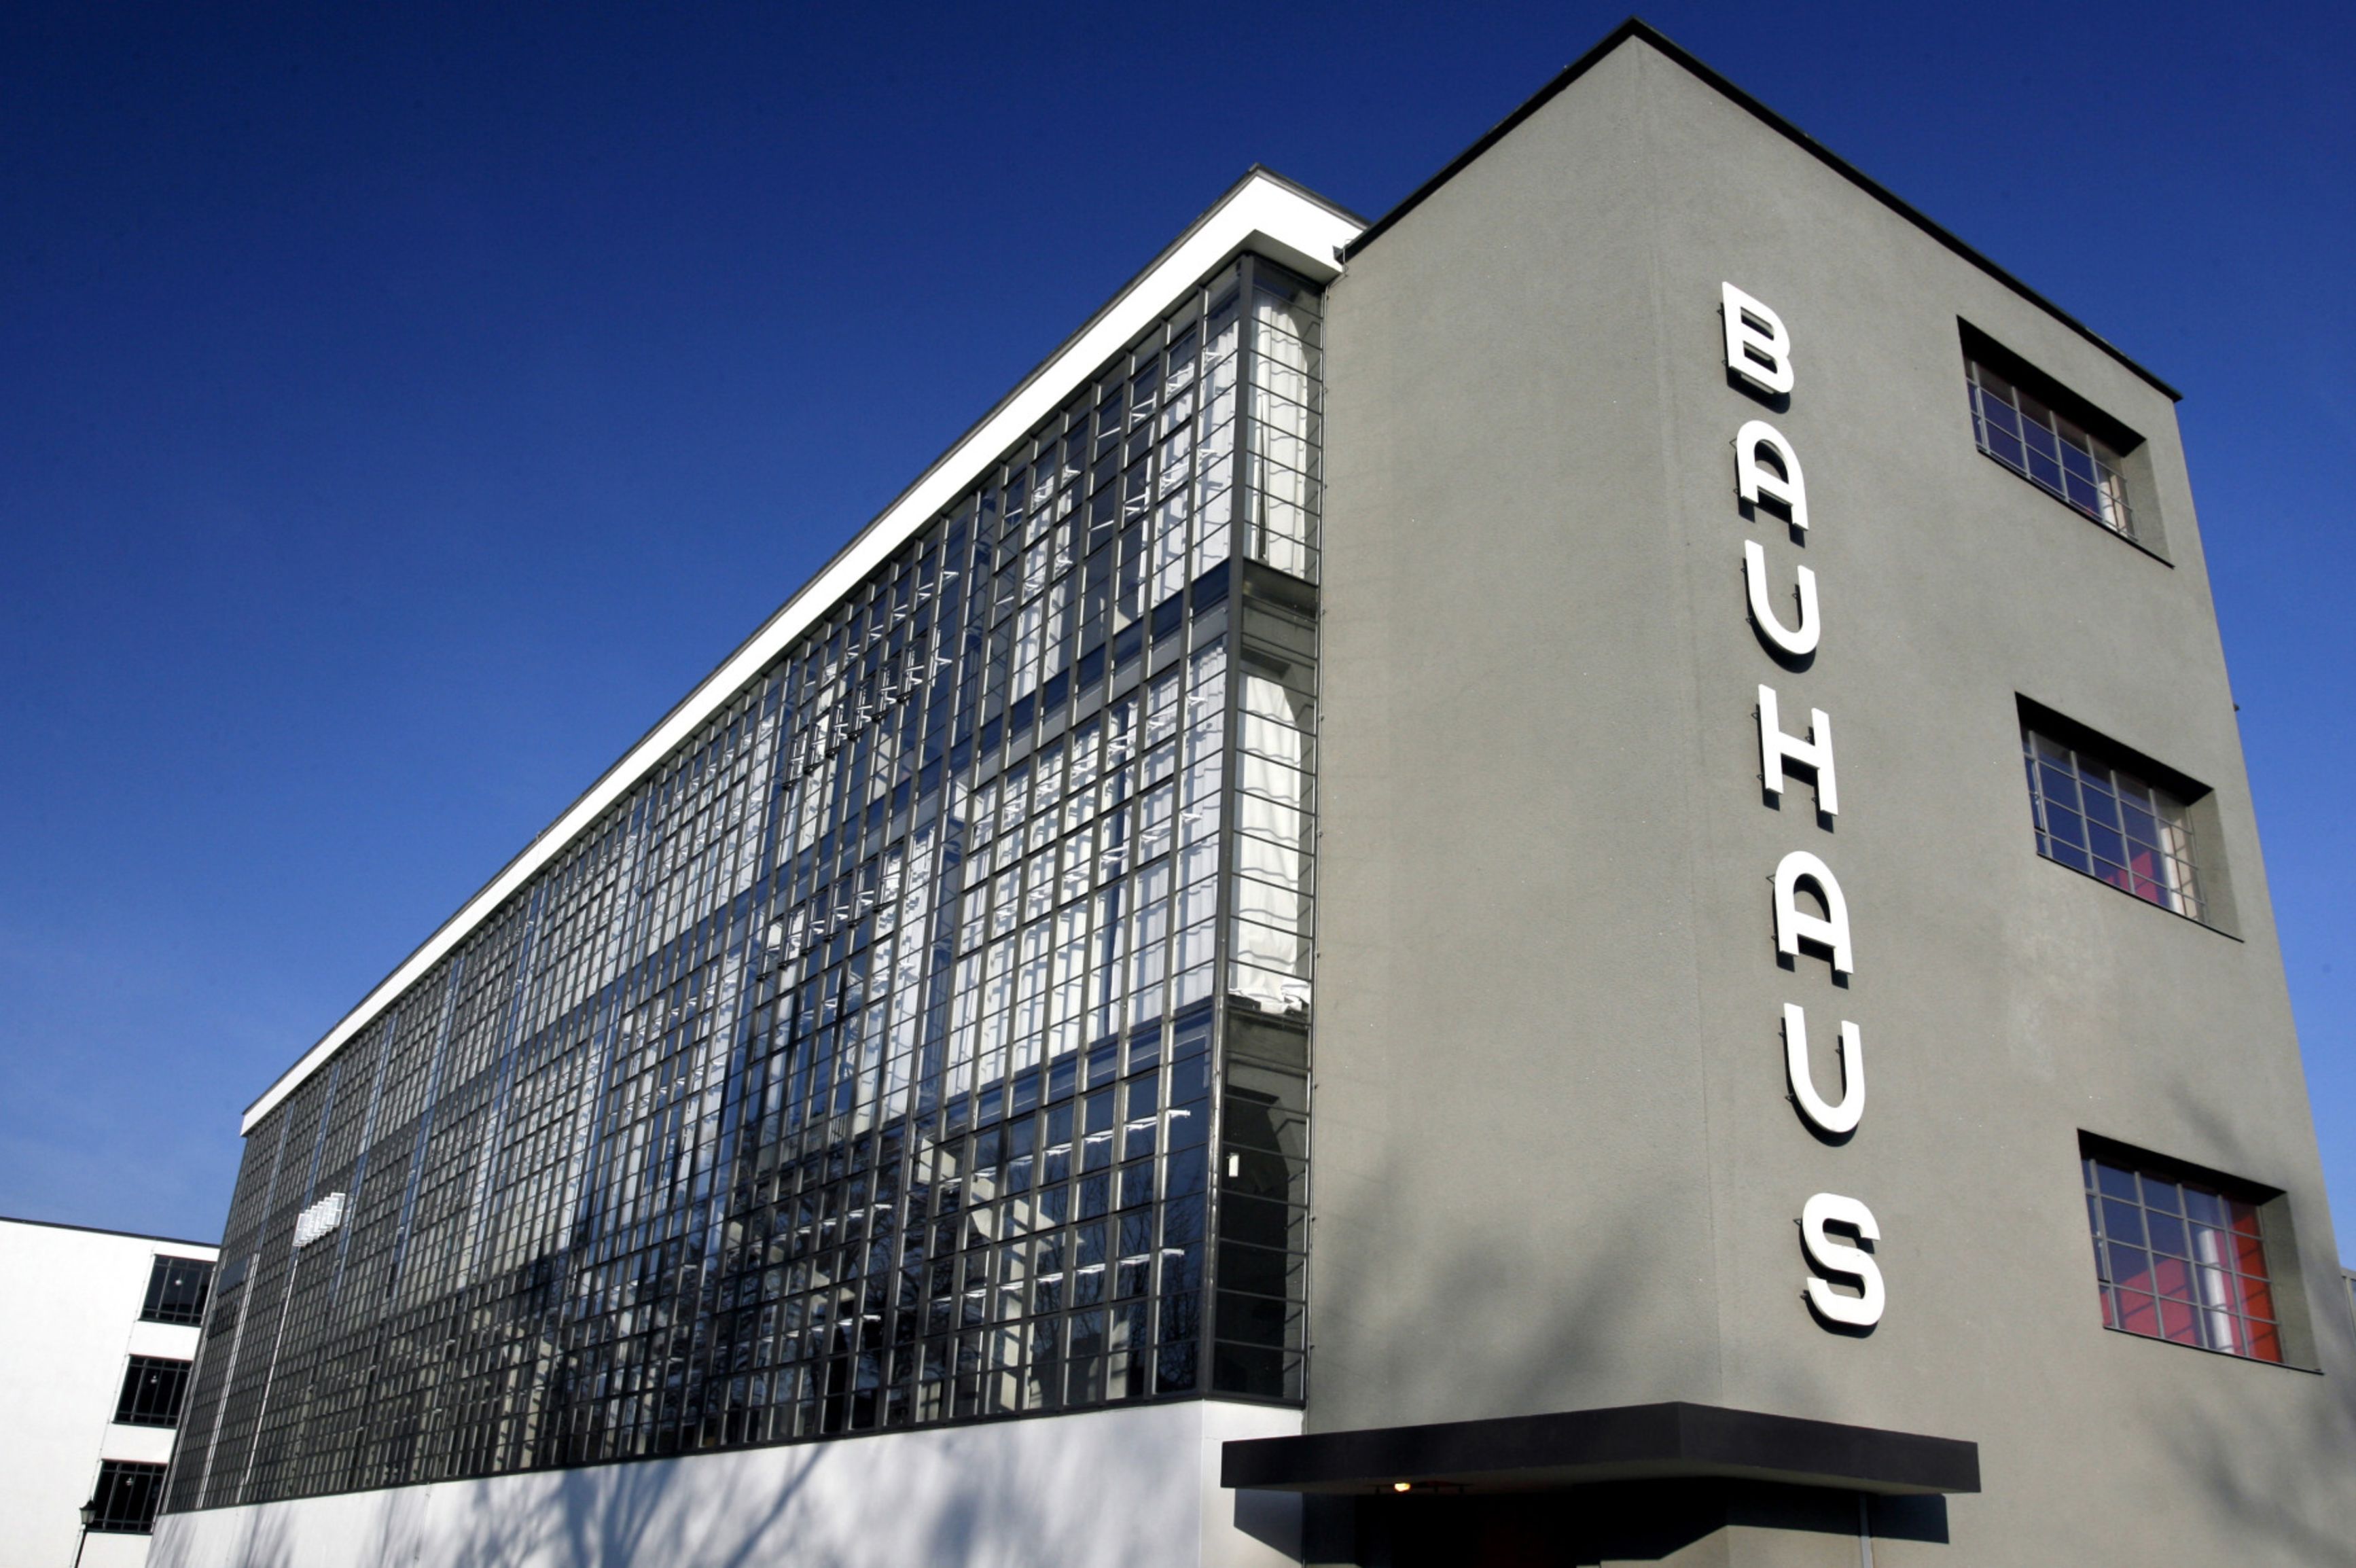 The exterior of the renovated Bauhaus building, designed by Walter Gropius,&nbsp;in Dessau, Germany.